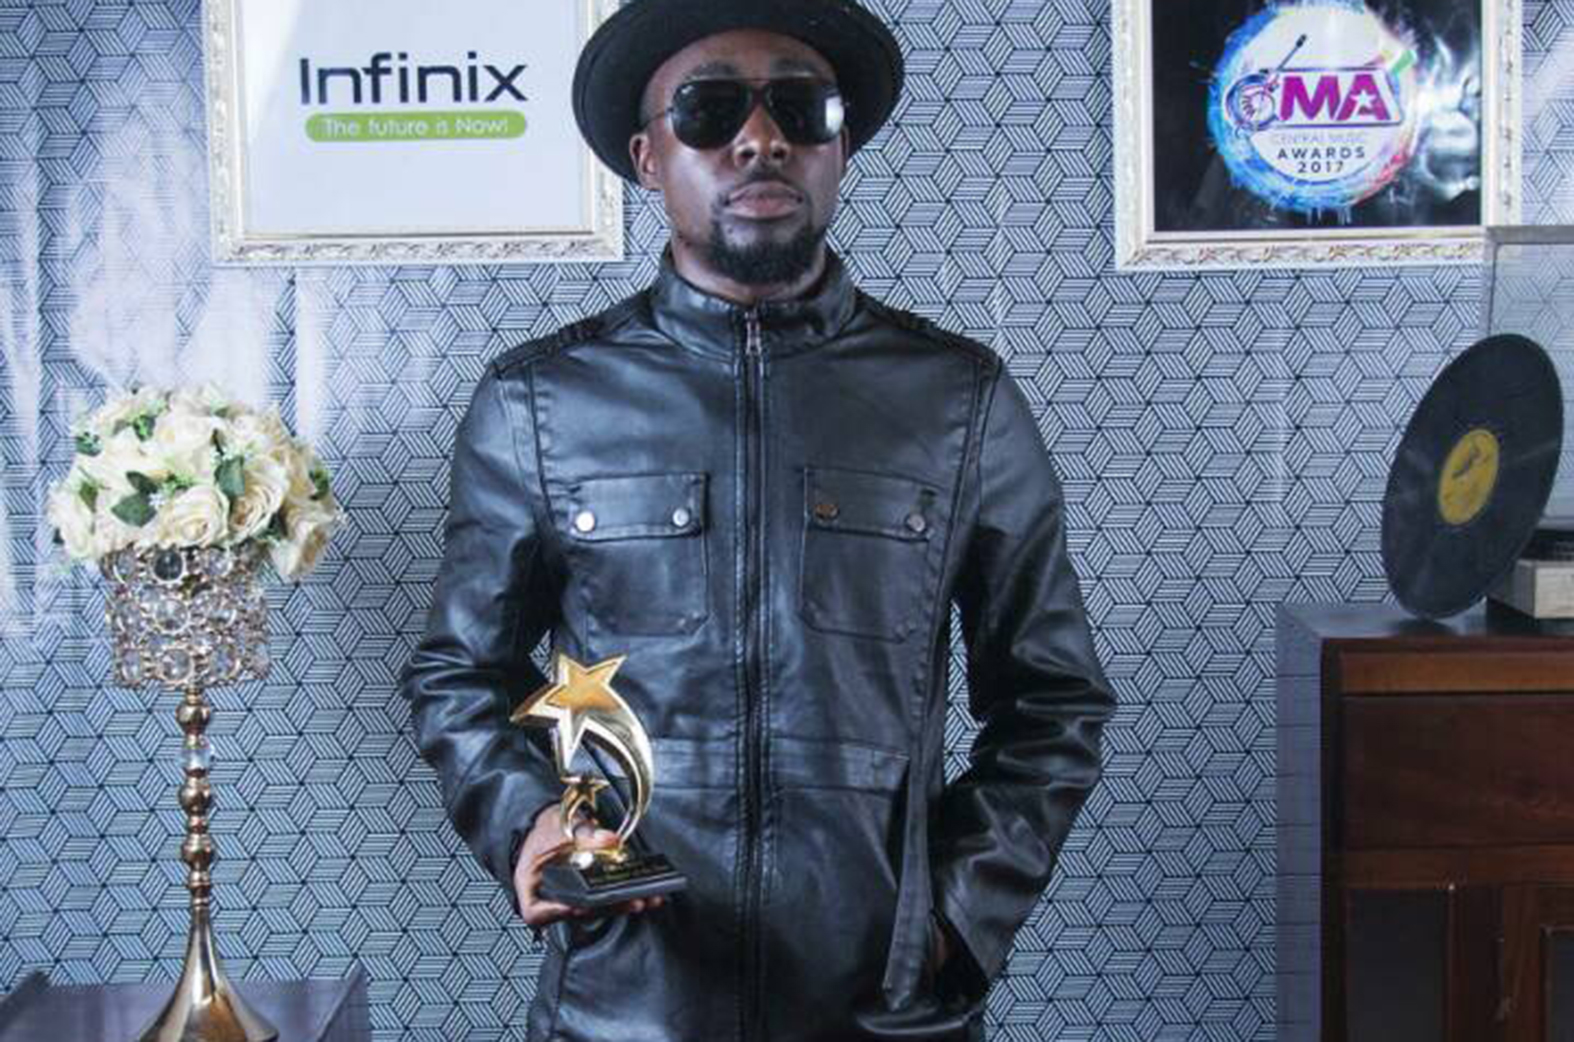 teephlow, central music awards